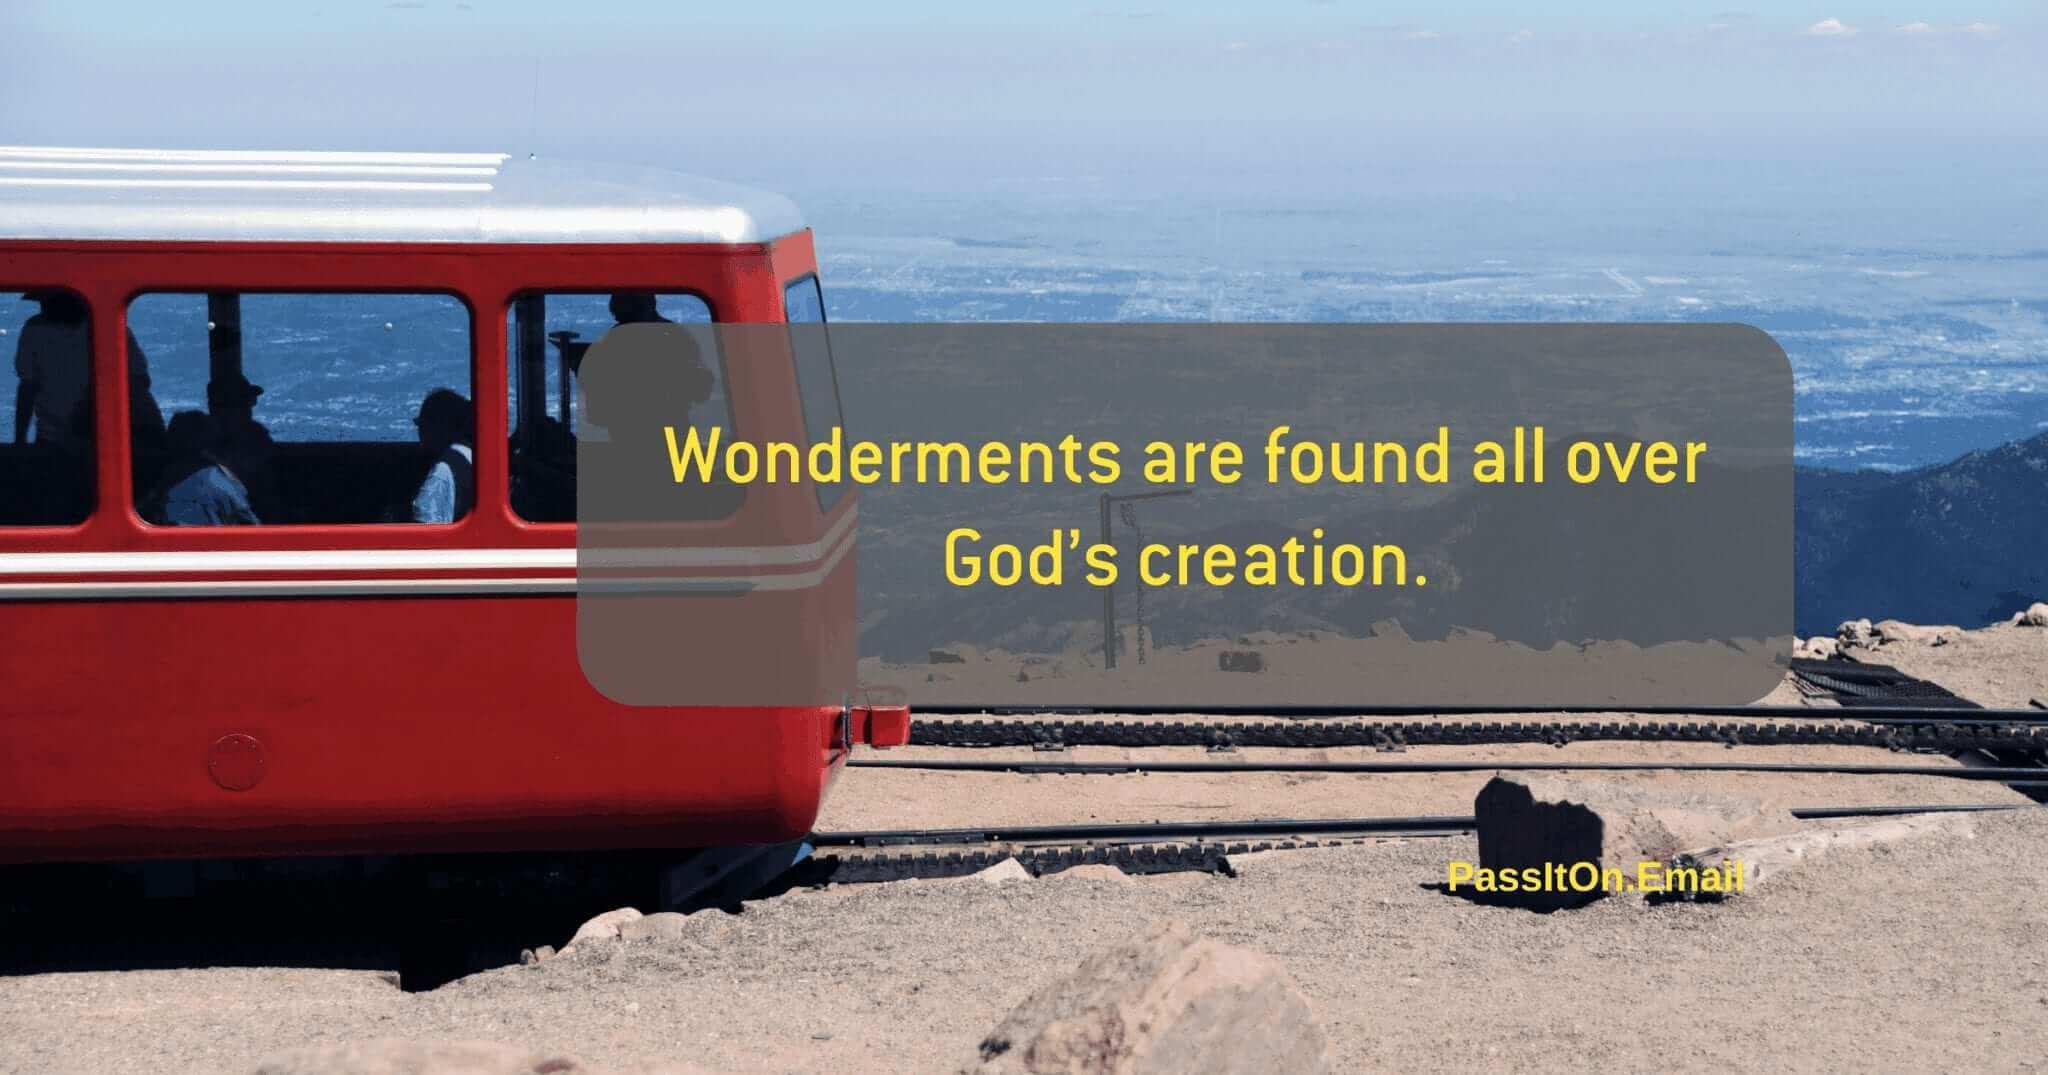 Wonderments are found all over God’s creation